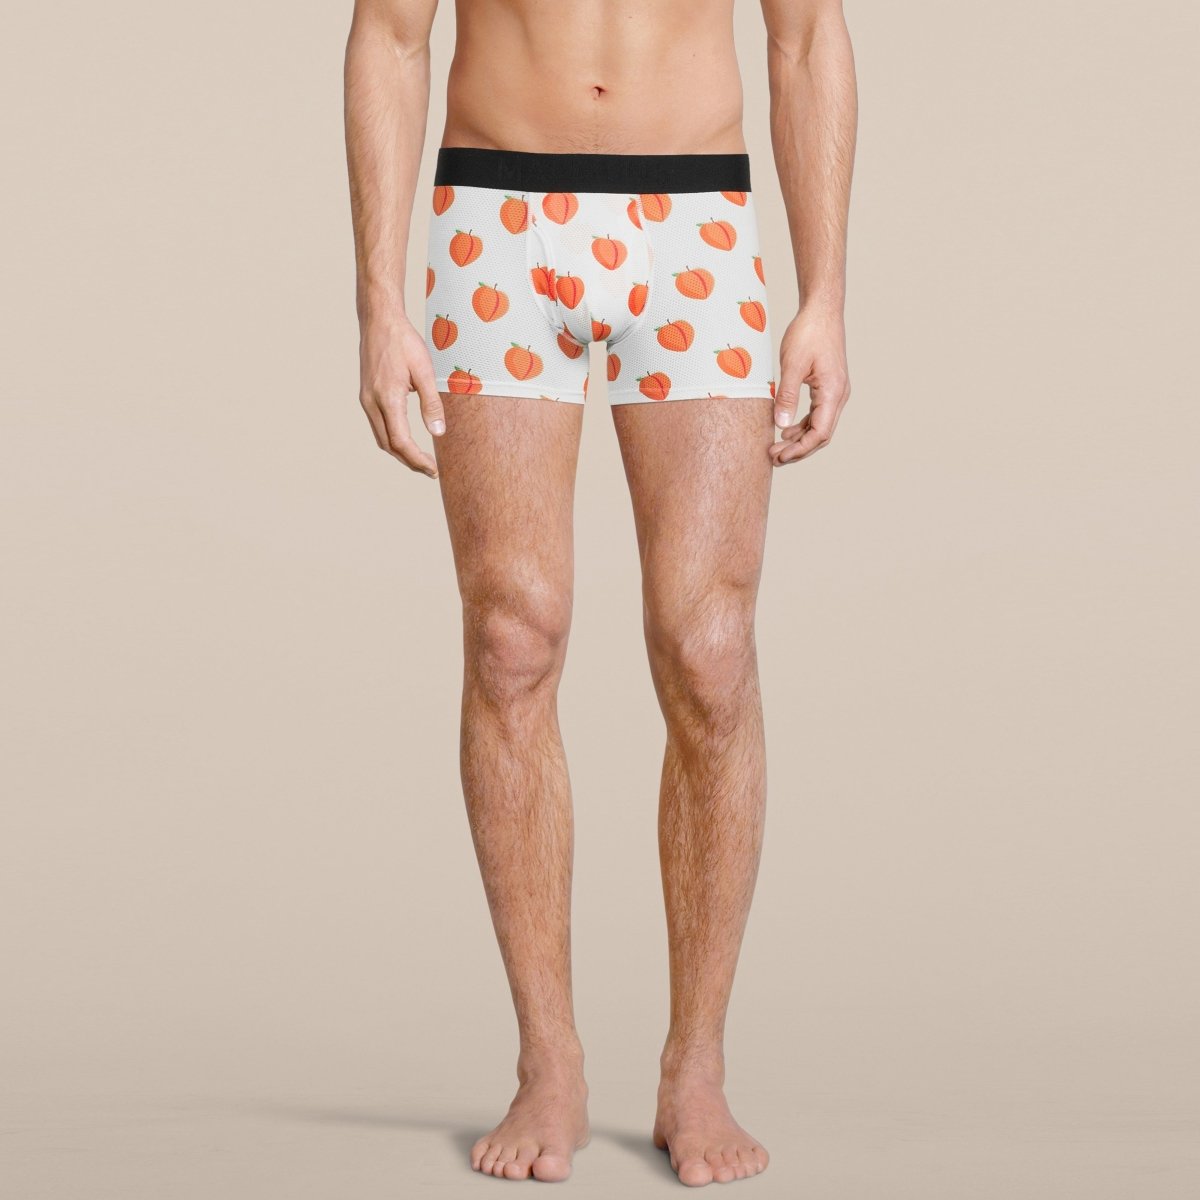 Victoria's Secret VS PINK Peach Boxer Shorts Size XS - $18 - From